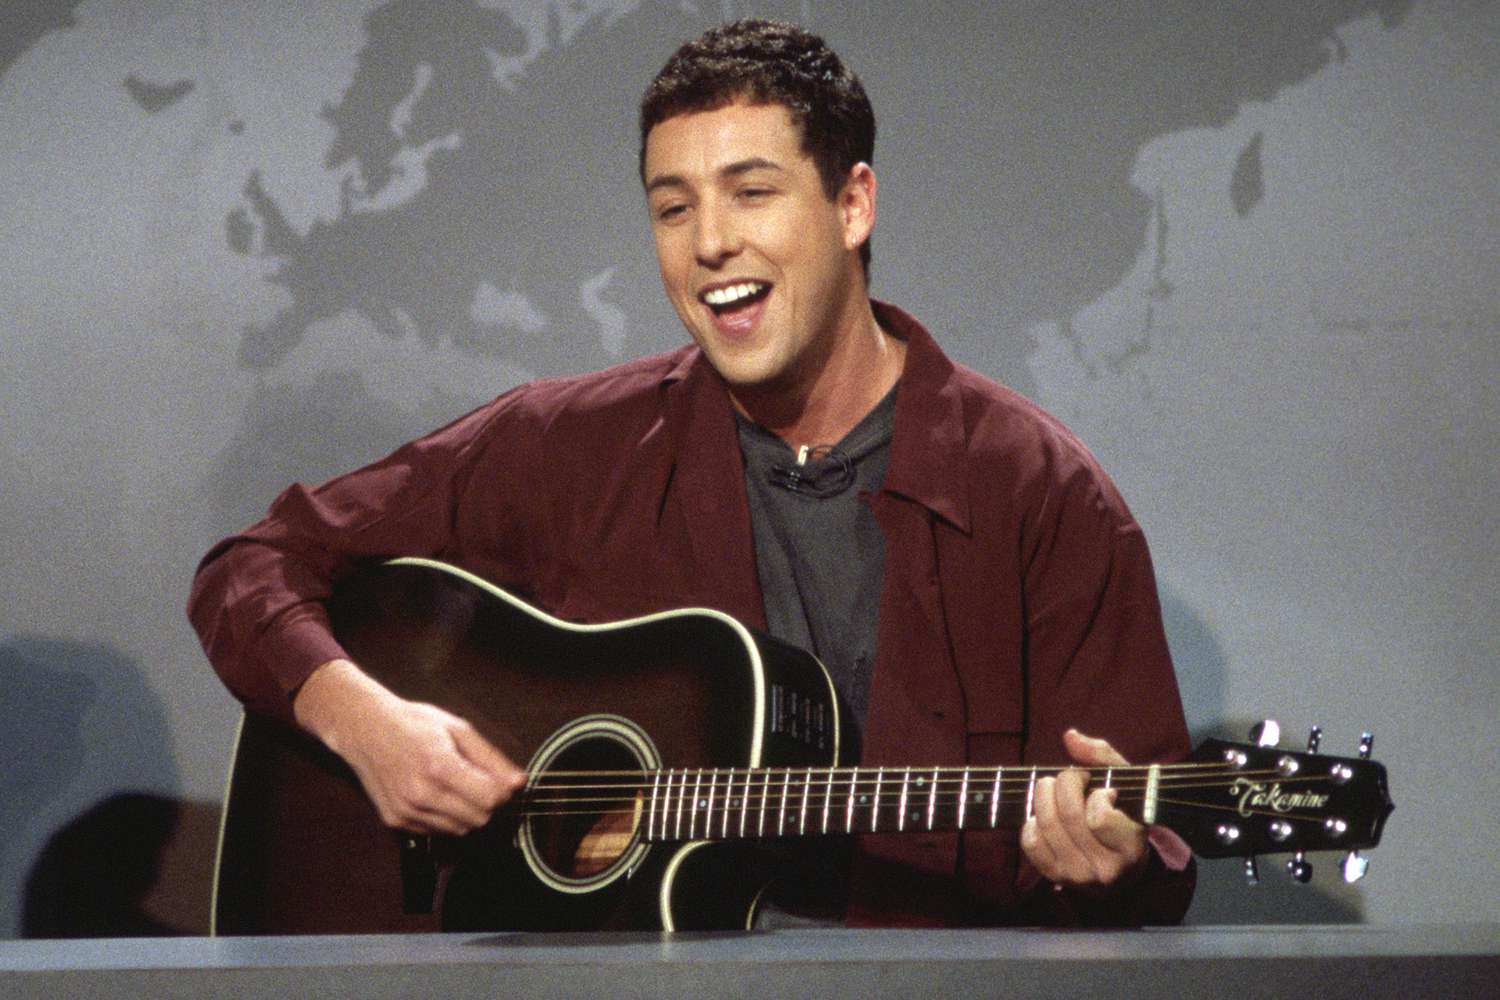 SATURDAY NIGHT LIVE -- Episode 7 -- Air Date 12/03/1994 -- Pictured: Adam Sandler performs 'The Chanukah Song' during "Weekend Update" on December 3, 1994 (Photo by Alan Singer/NBCU Photo Bank/NBCUniversal via Getty Images via Getty Images)